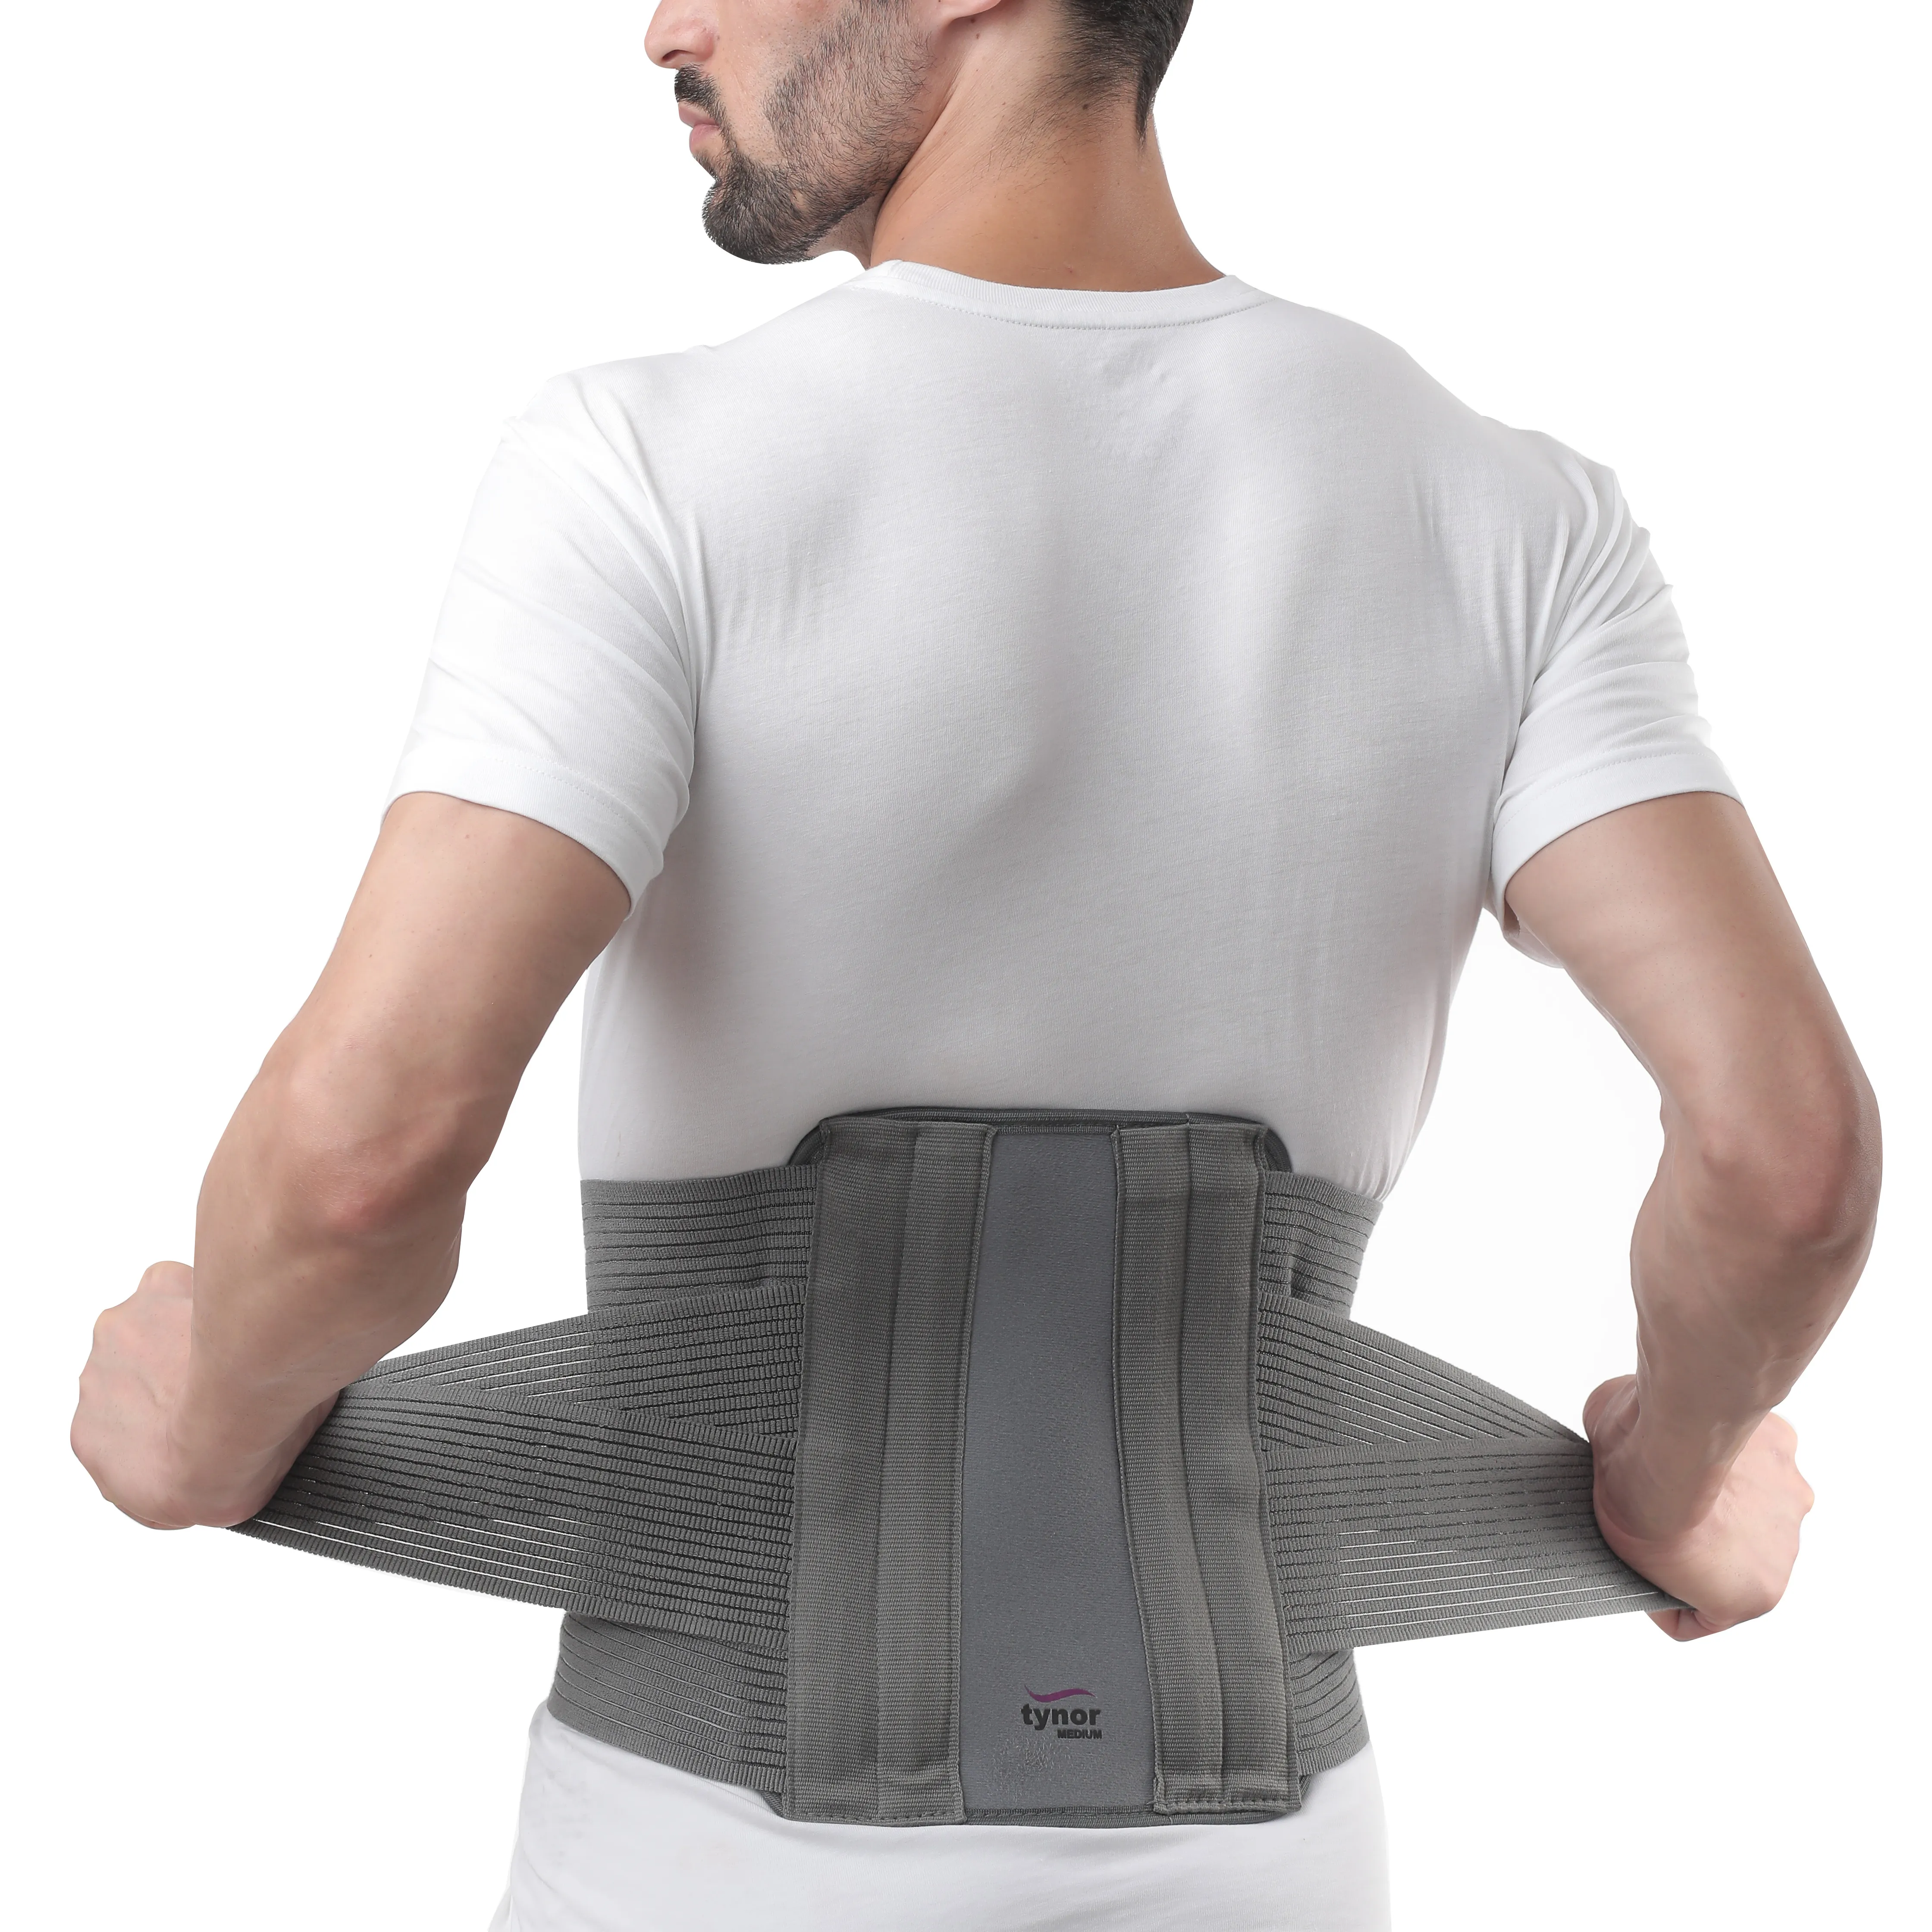 Tynor Abdominal Support 9 Belt Xl, 1 Count Price, Uses, Side